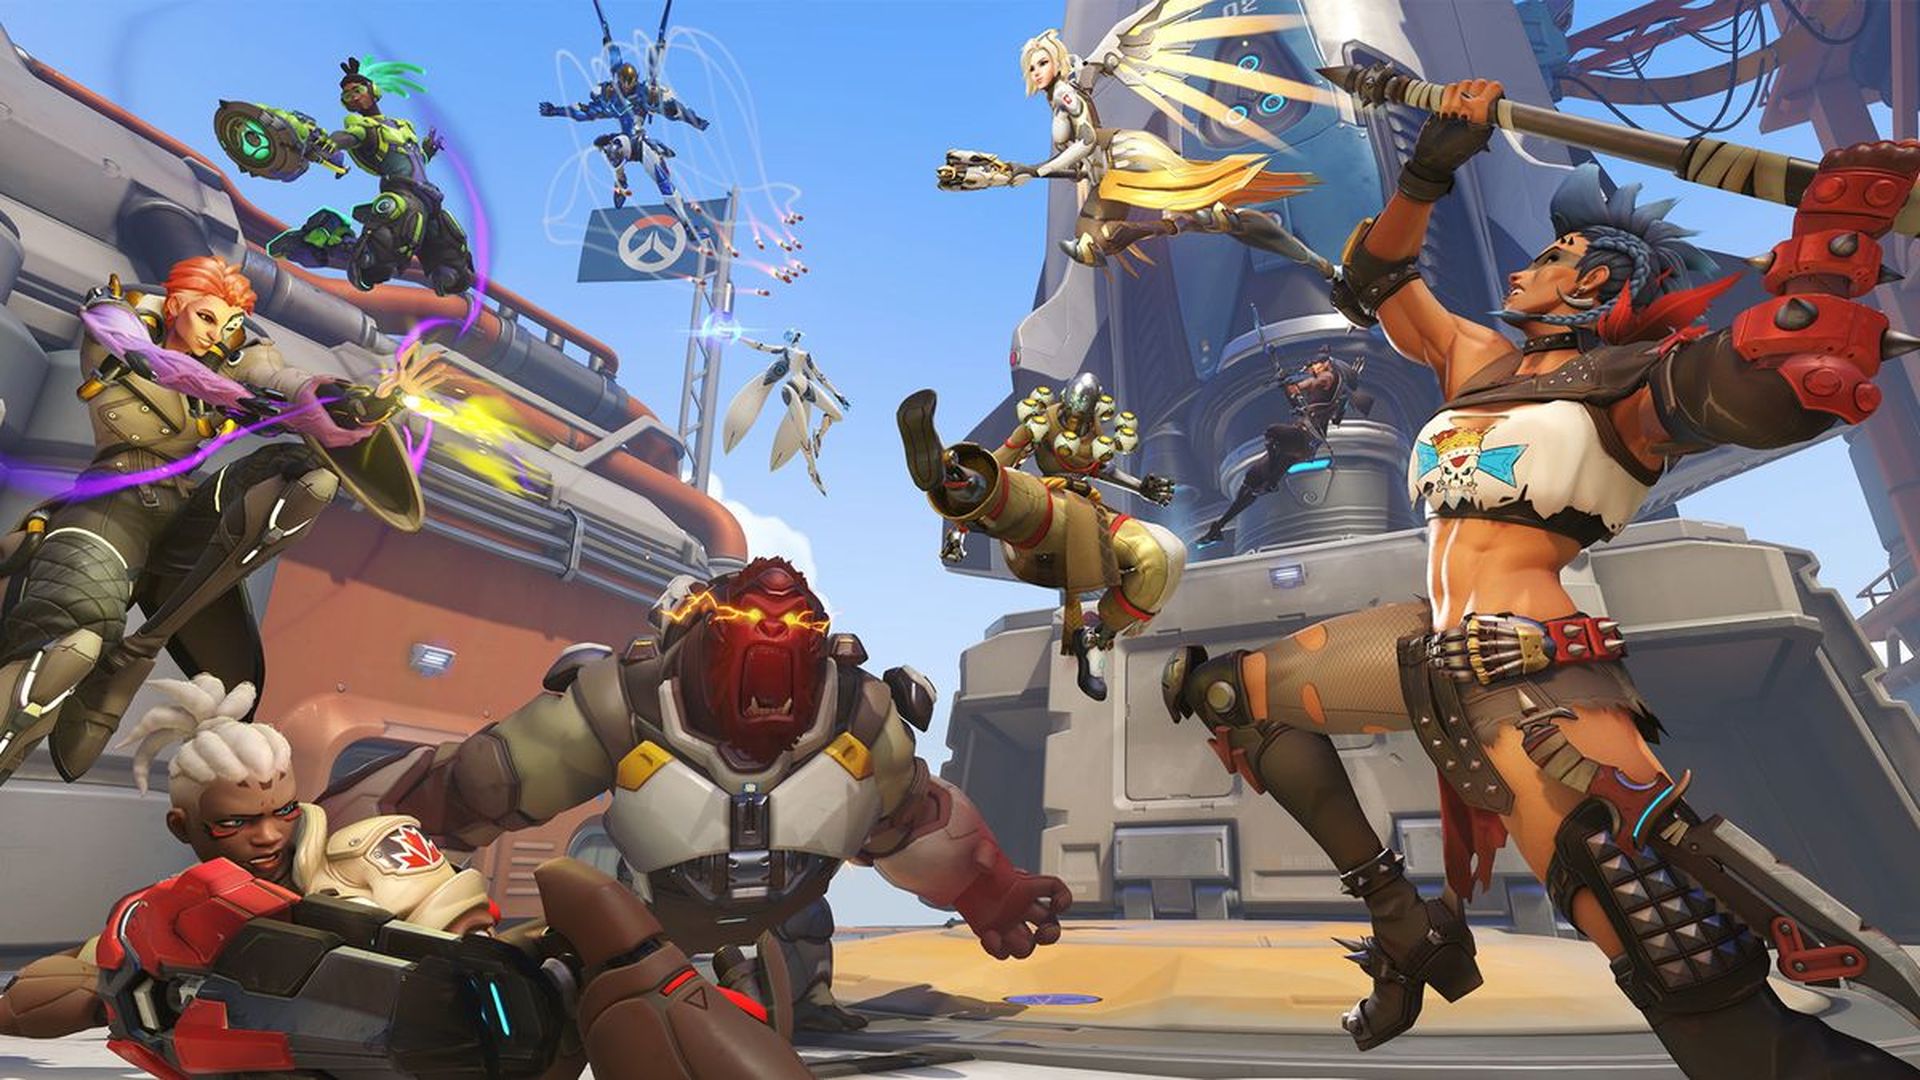 In this article, we are going to be covering the best Overwatch 2 settings to improve performance and quality, so you can enjoy the game to the fullest.